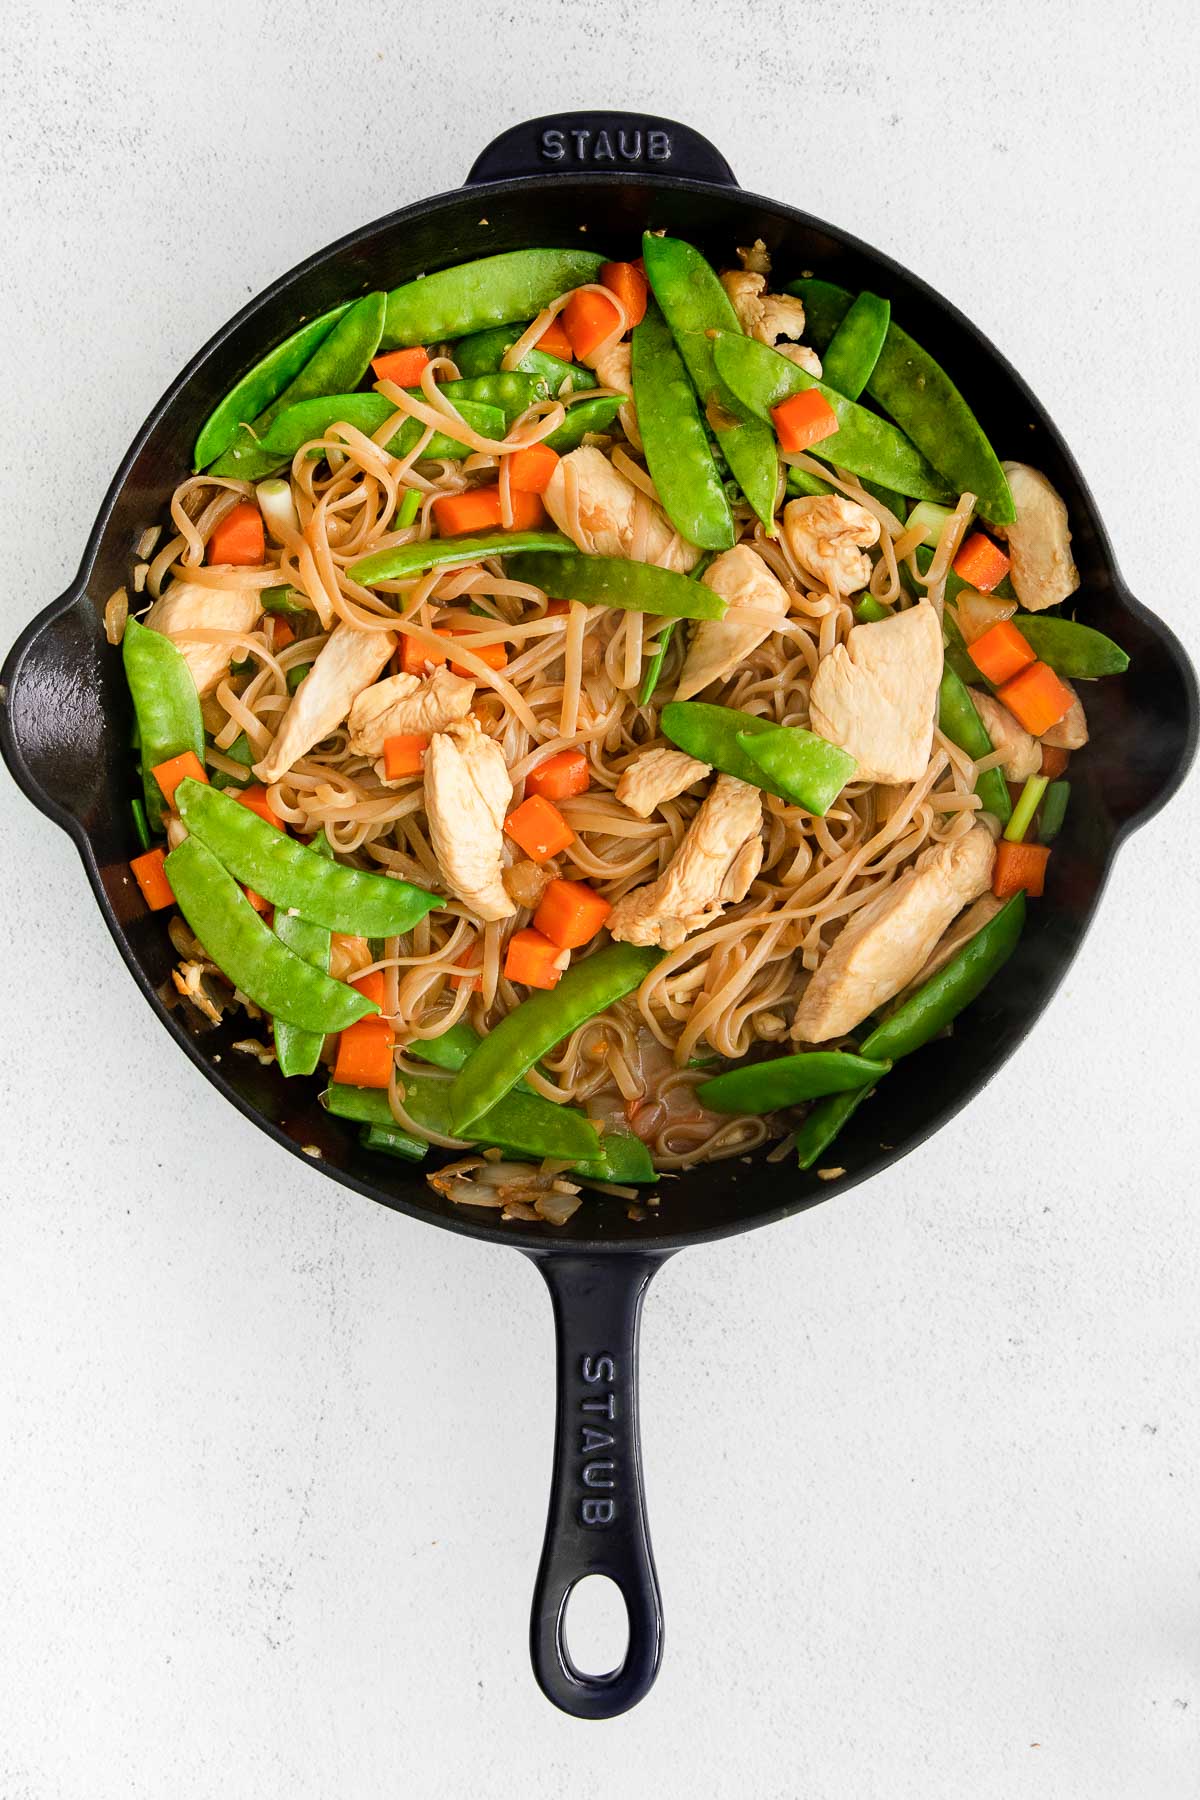 cast iron skillet with snow peas, sliced chicken, diced carrots and rice noodles